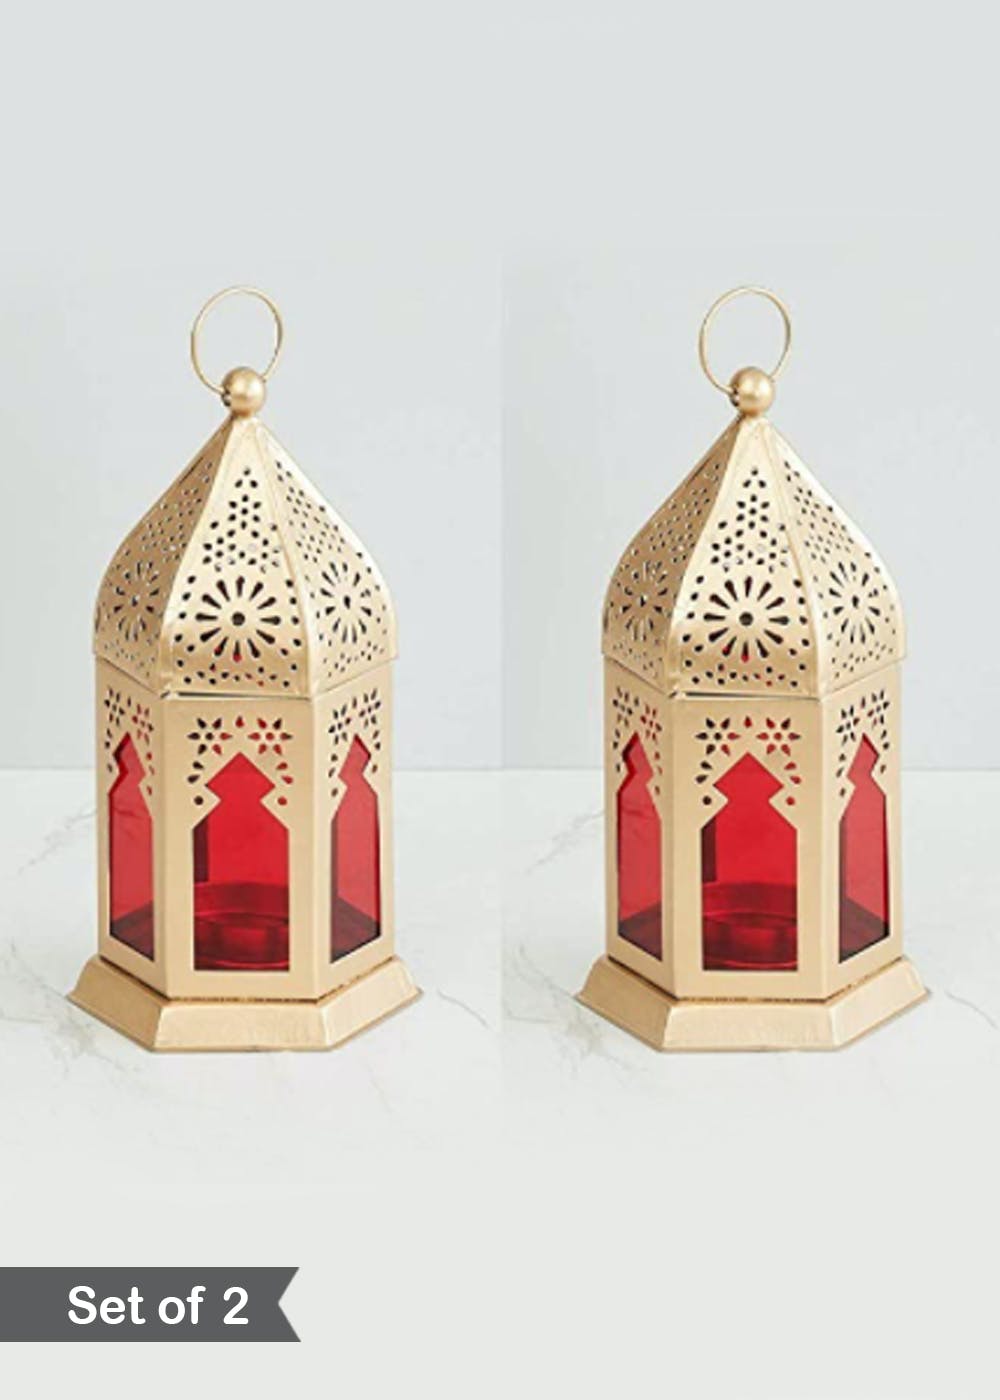 Antique Tealight Golden Color Lantern With Red Glass -Set Of 2